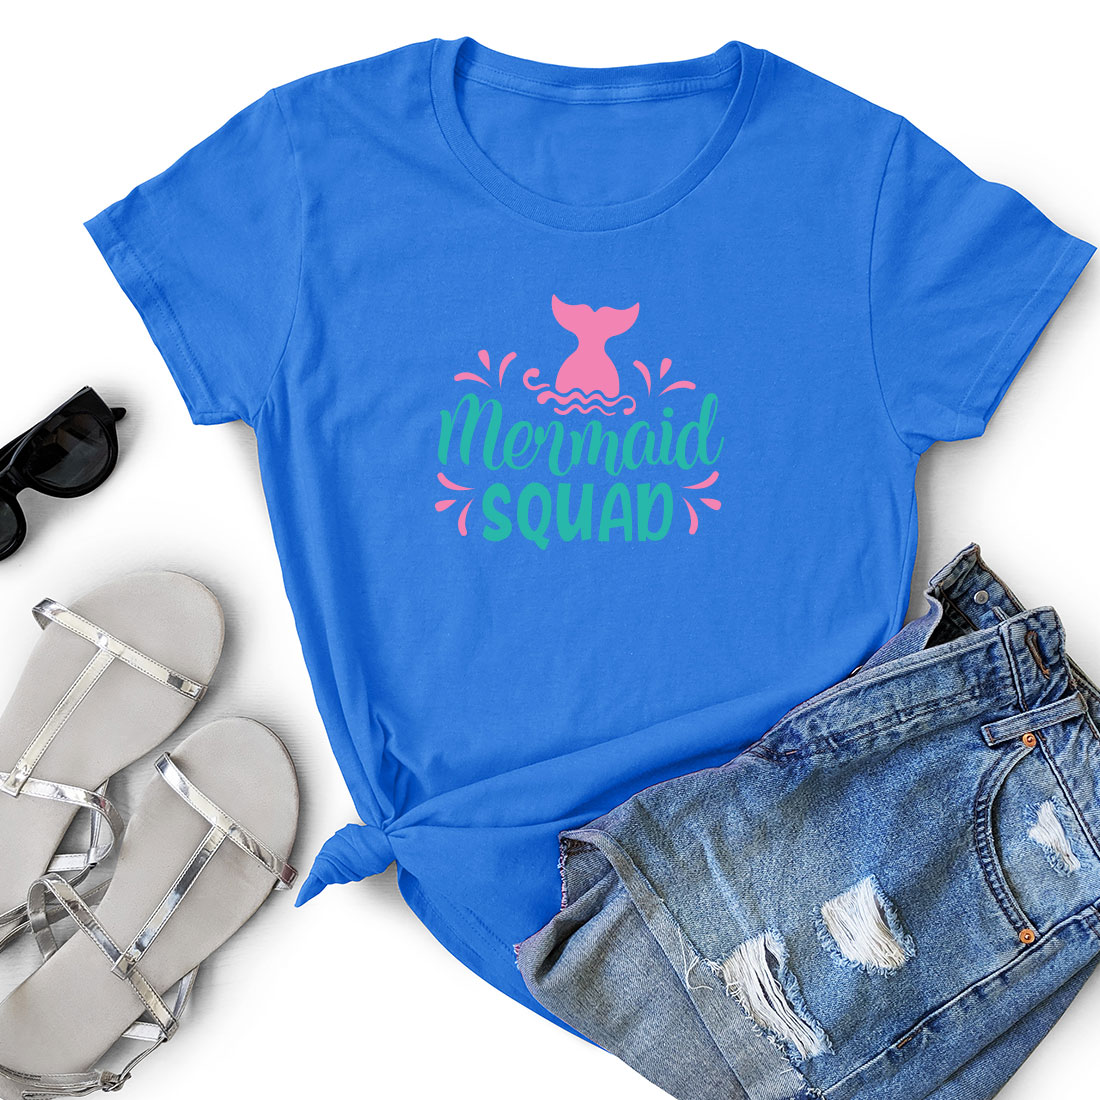 T - shirt that says mermaid squad next to a pair of shorts.